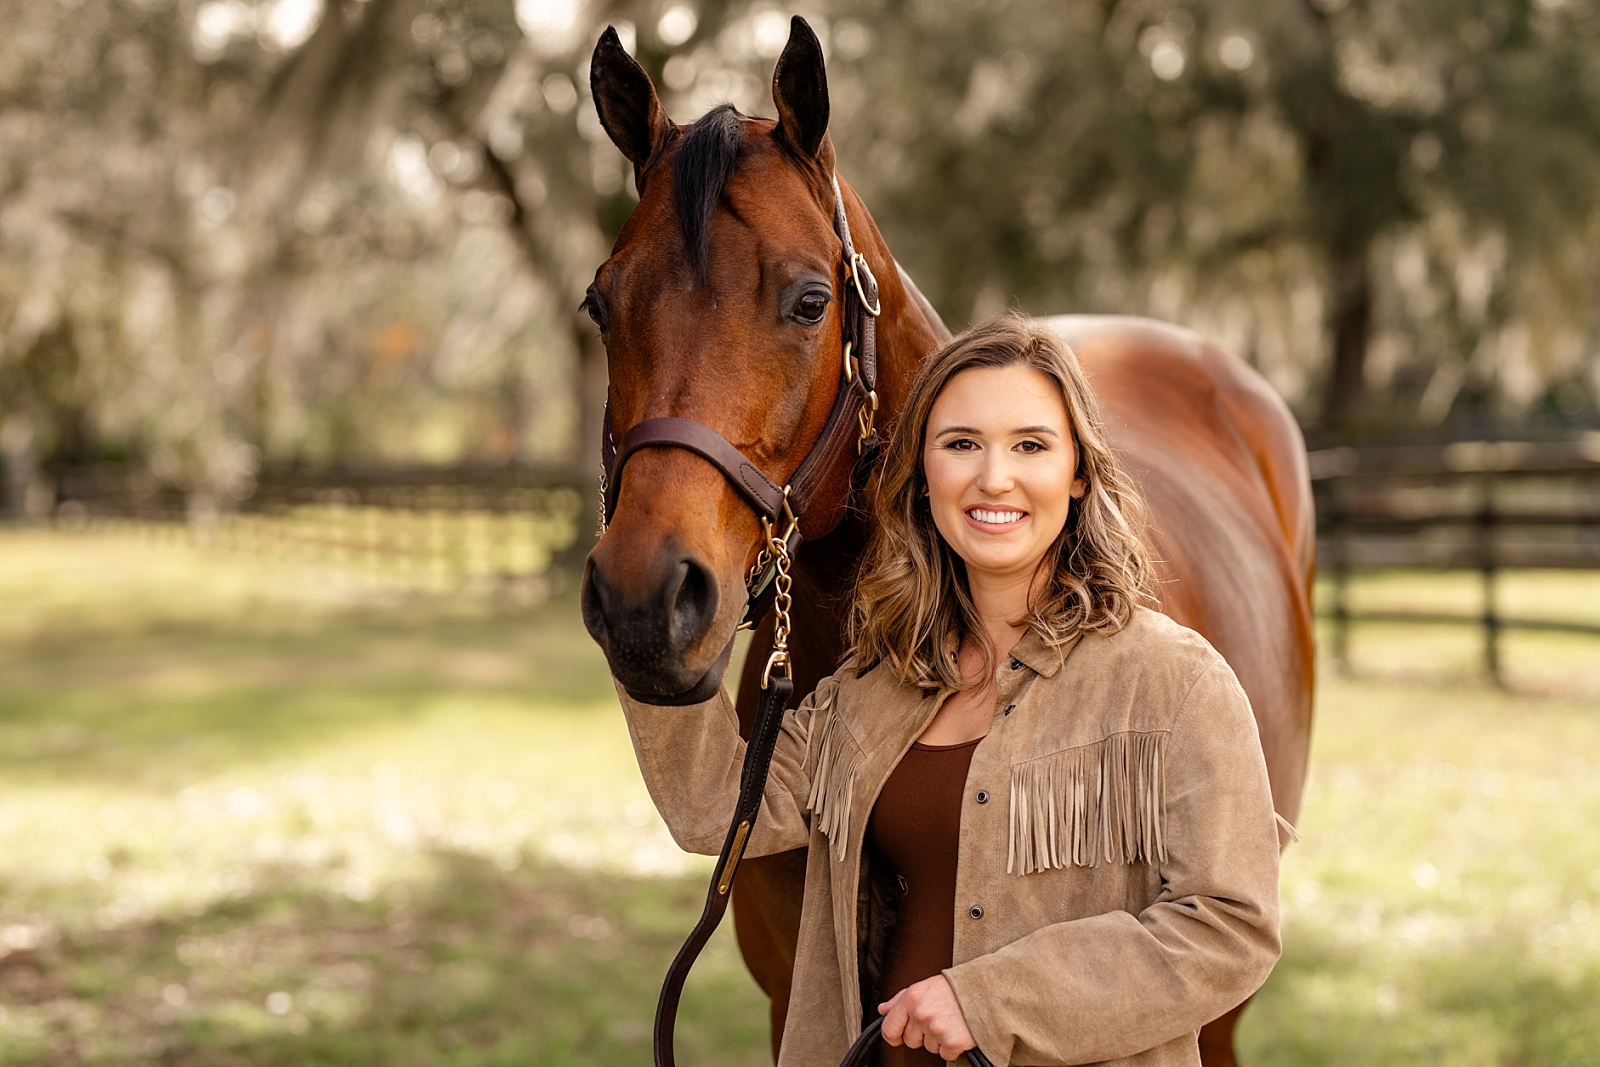 Equine Attorney at Law. Horse lawyer. Equestrian business branding.